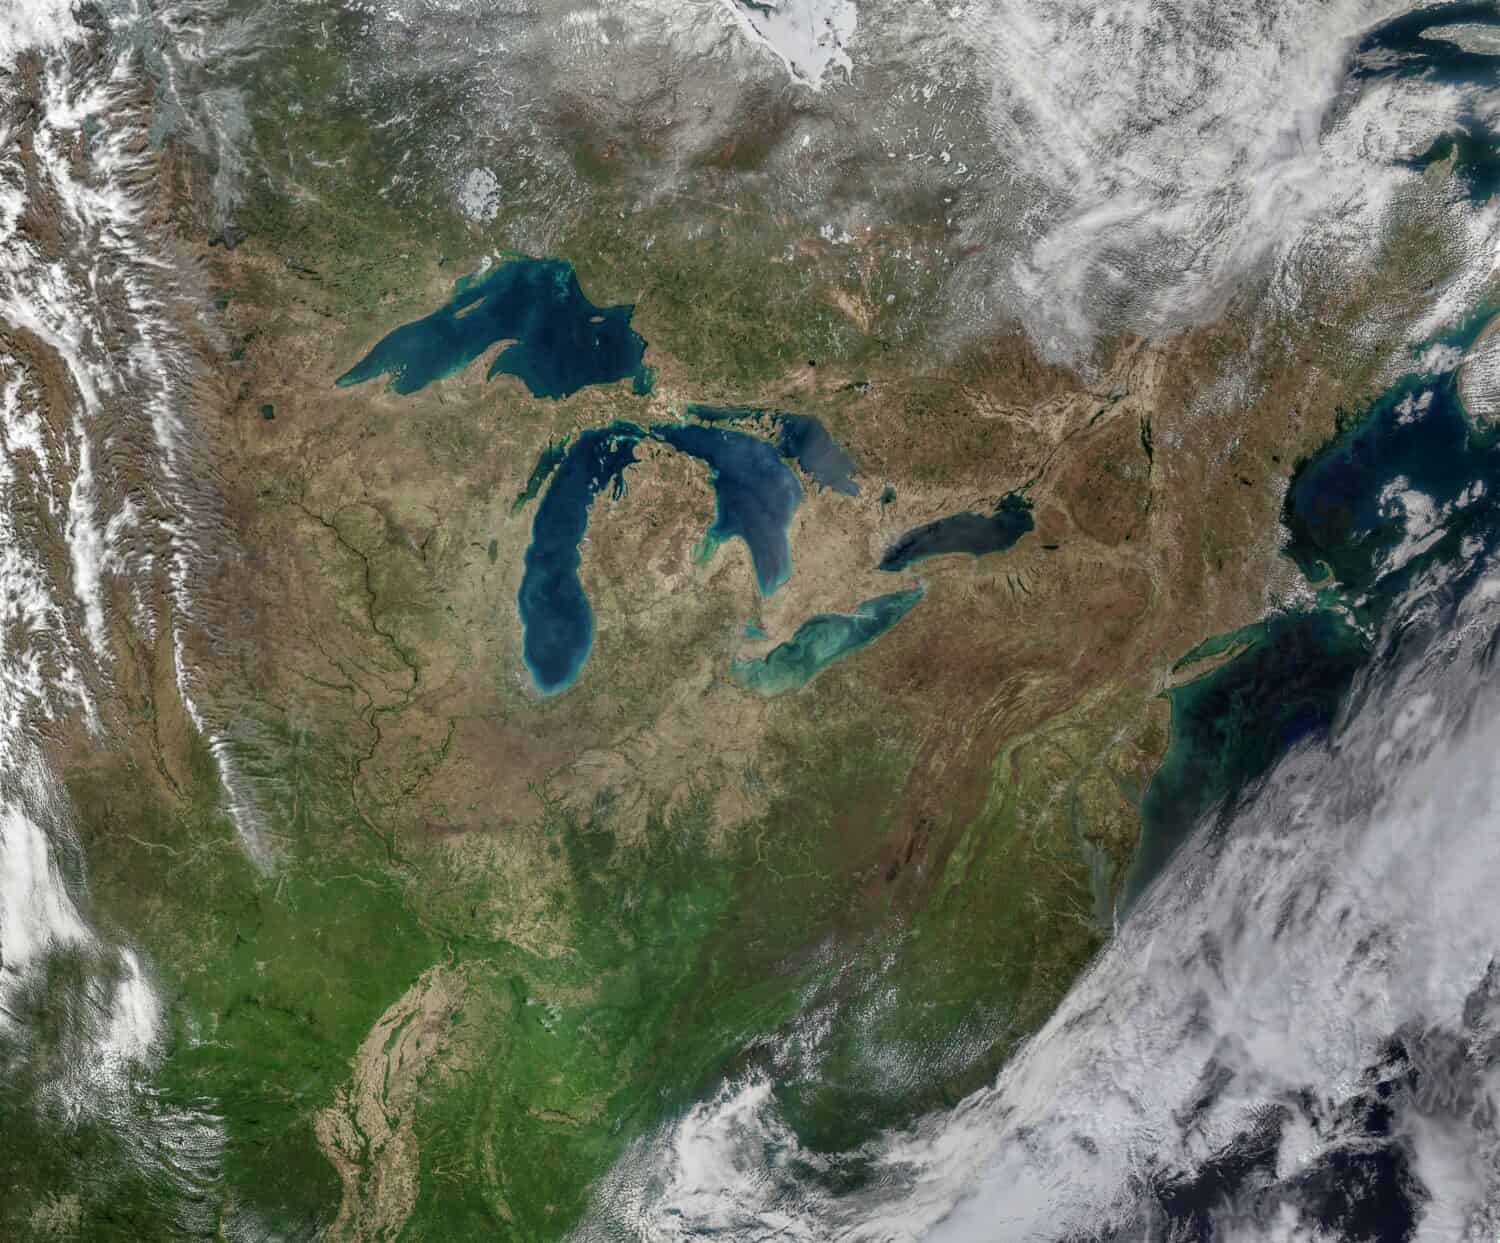 The Great Lakes. High-Quality Image.